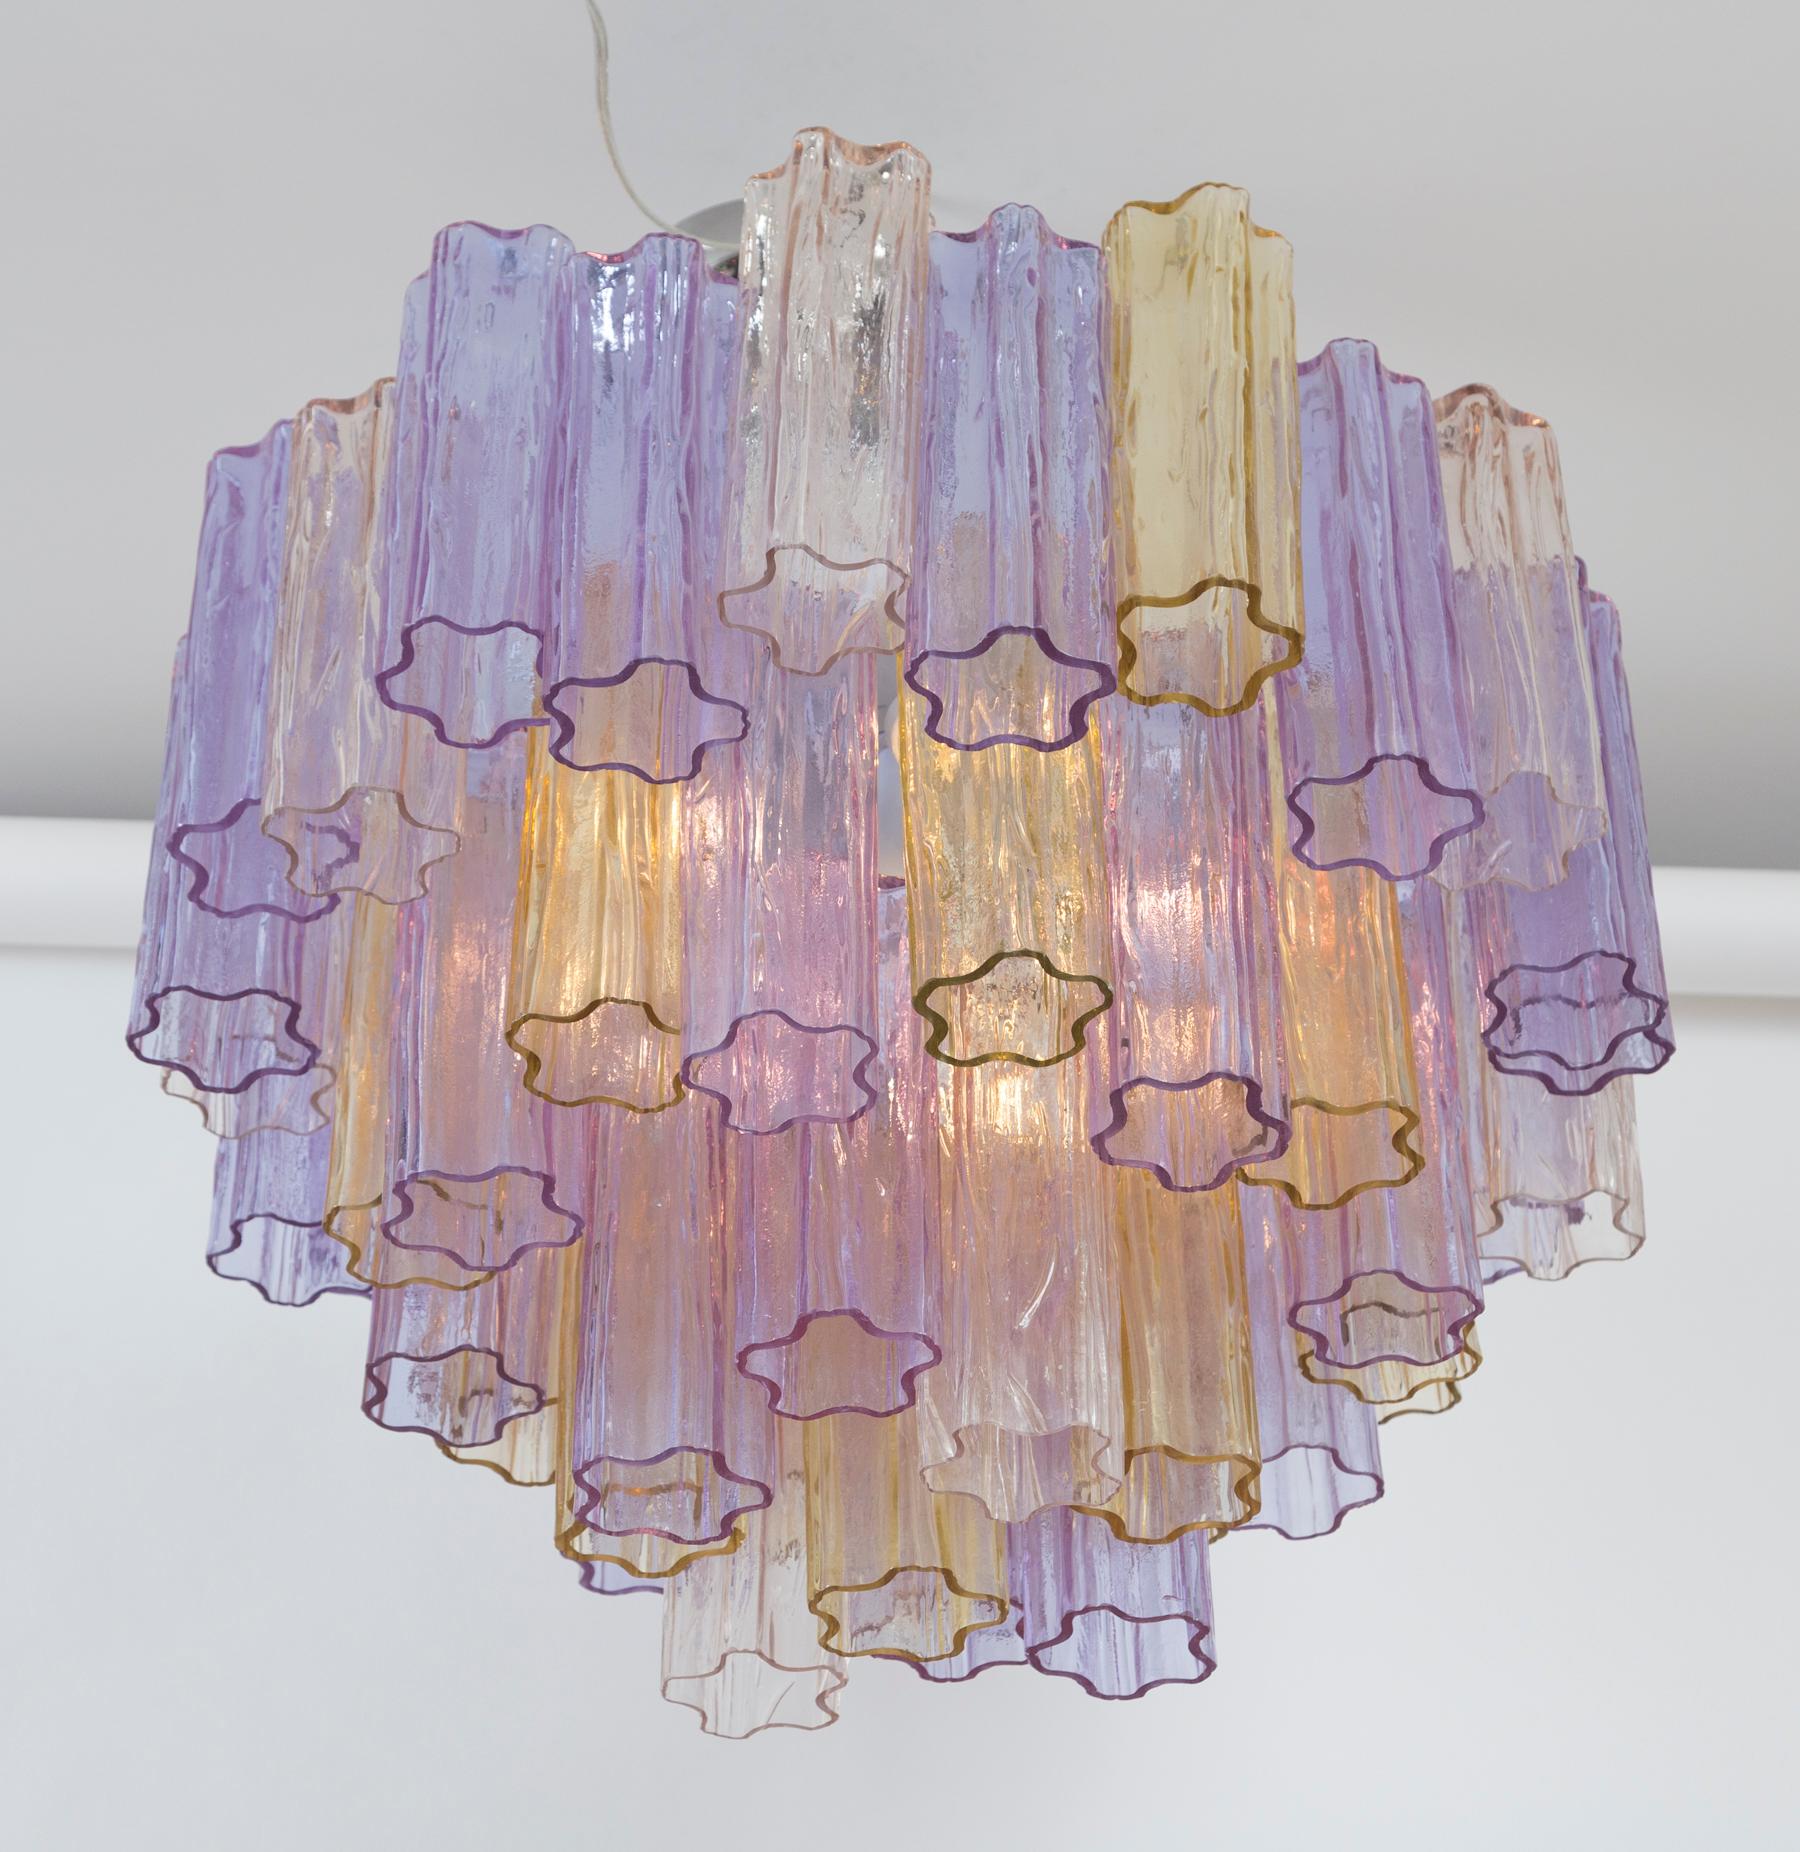 Late 20th Century Mid Century Italian Layered Tronchi Ceiling Fixture, UL certified